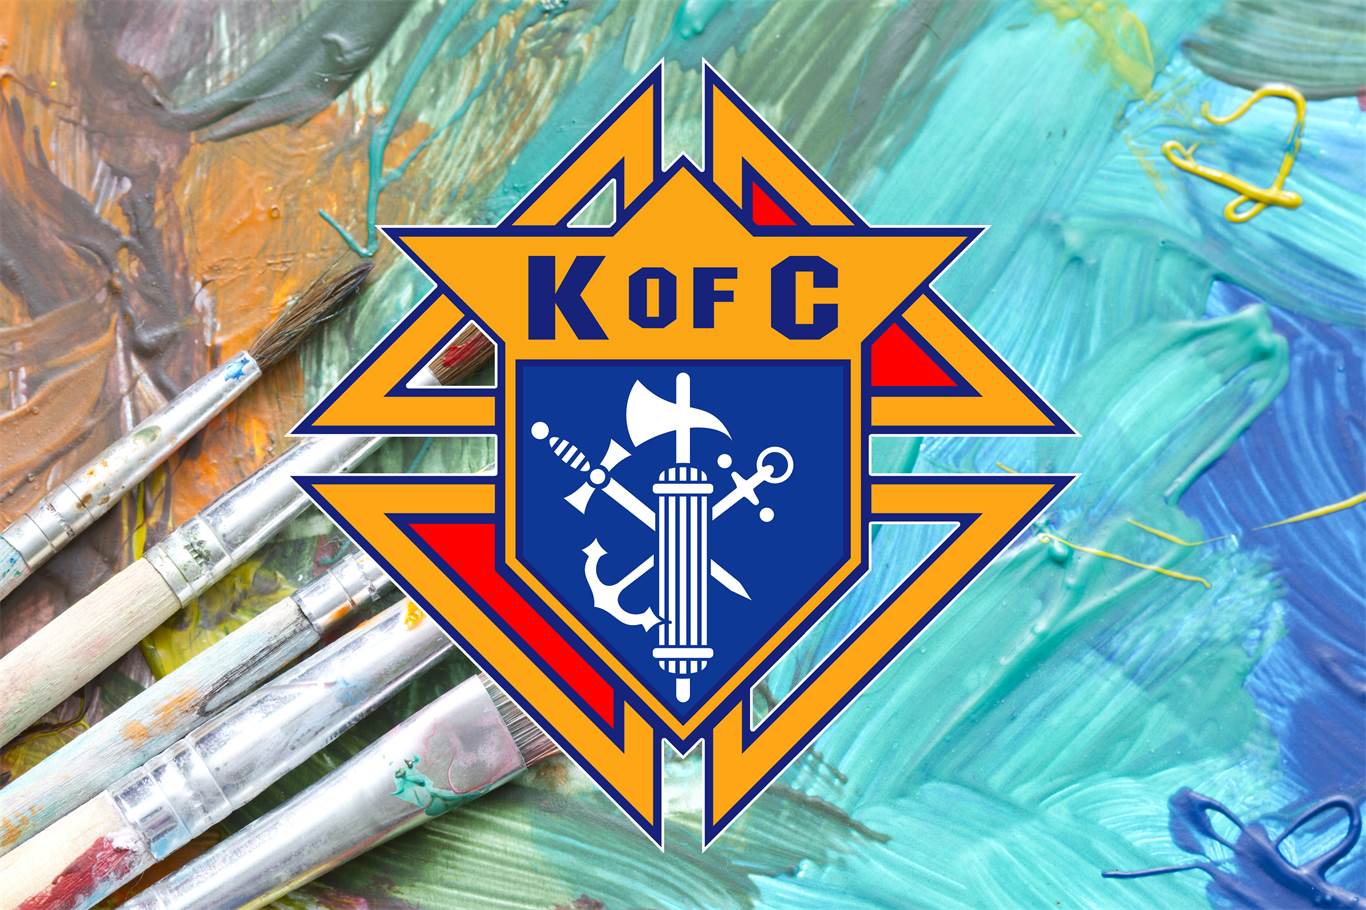 Knights of Columbus Substance Abuse and Awareness Poster Contest 2017